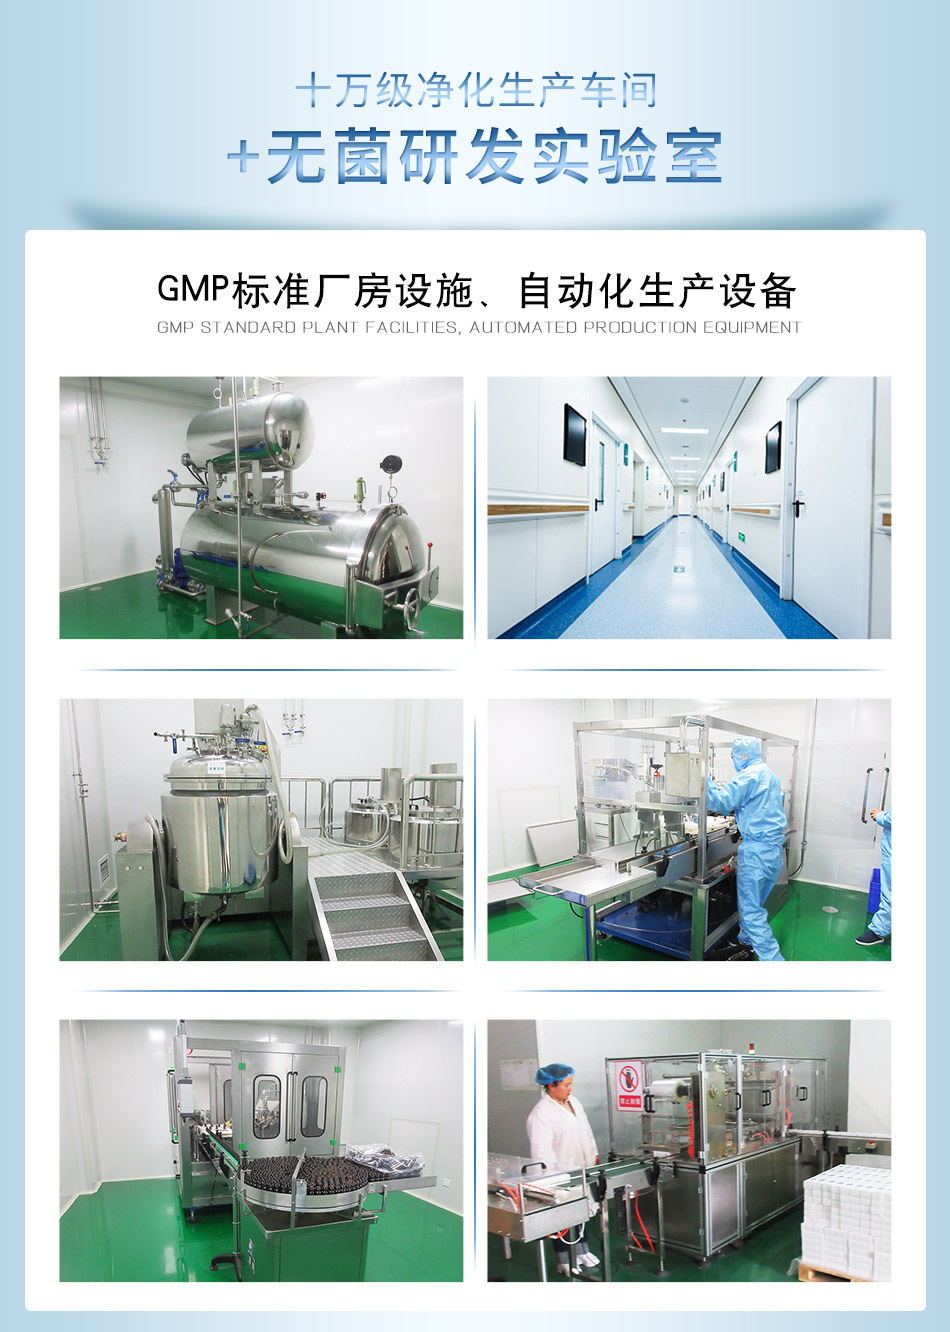 Manufacturer's production and processing of gynecological cleansers, private area cleansers, female private area care, antibacterial cleaning, and consumer label